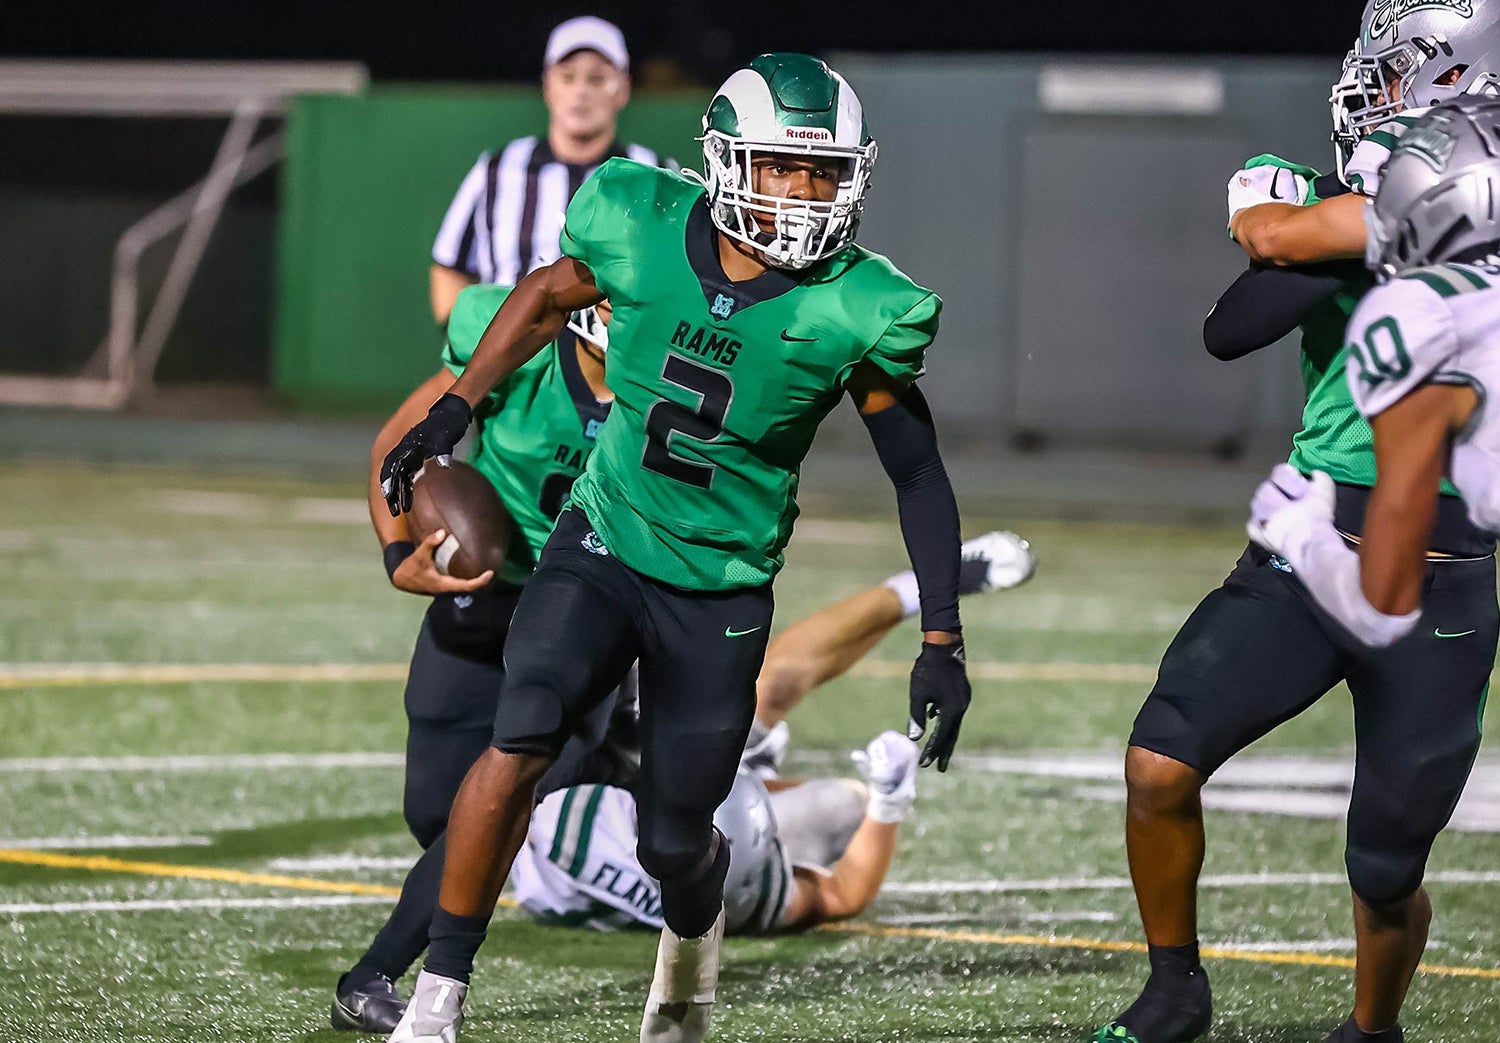 St. Mary's (Stockton) junior running back Asante Carter had 170 rushing yards and three touchdowns in a 42-14 win last week for the No. 3 Rams. (Photo: Ralph Thompson)